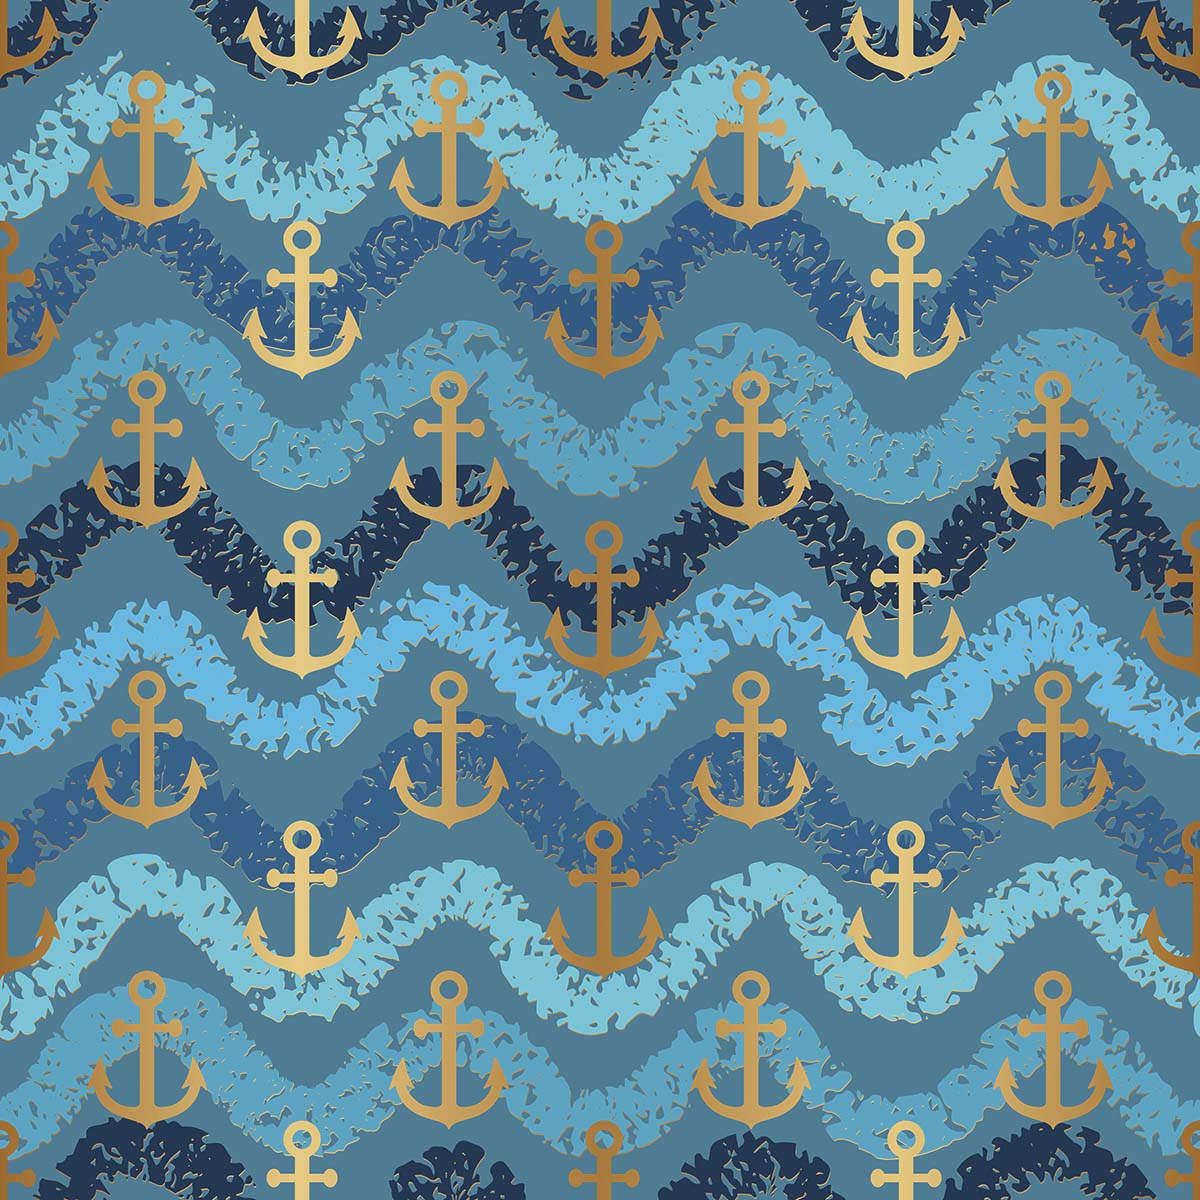 A pattern of anchors and waves